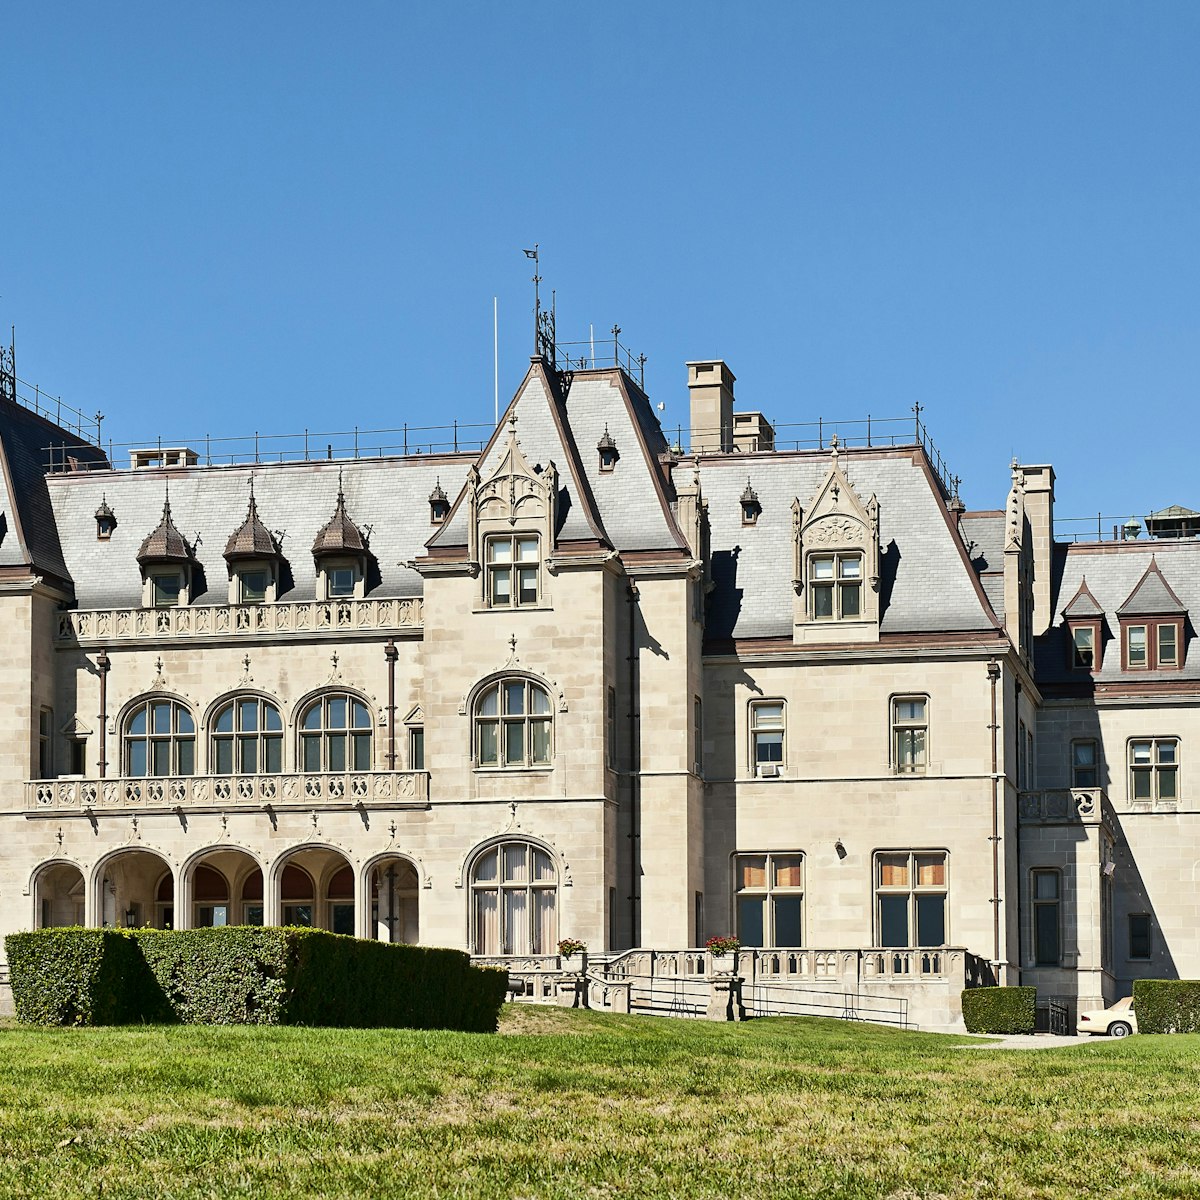 Ochre Court on the grounds of Salve Regina University, Cliff Walk, Newport, Rhode Island, RI, United States. (Photo by: MyLoupe/Univeral Images Group via Getty Images)